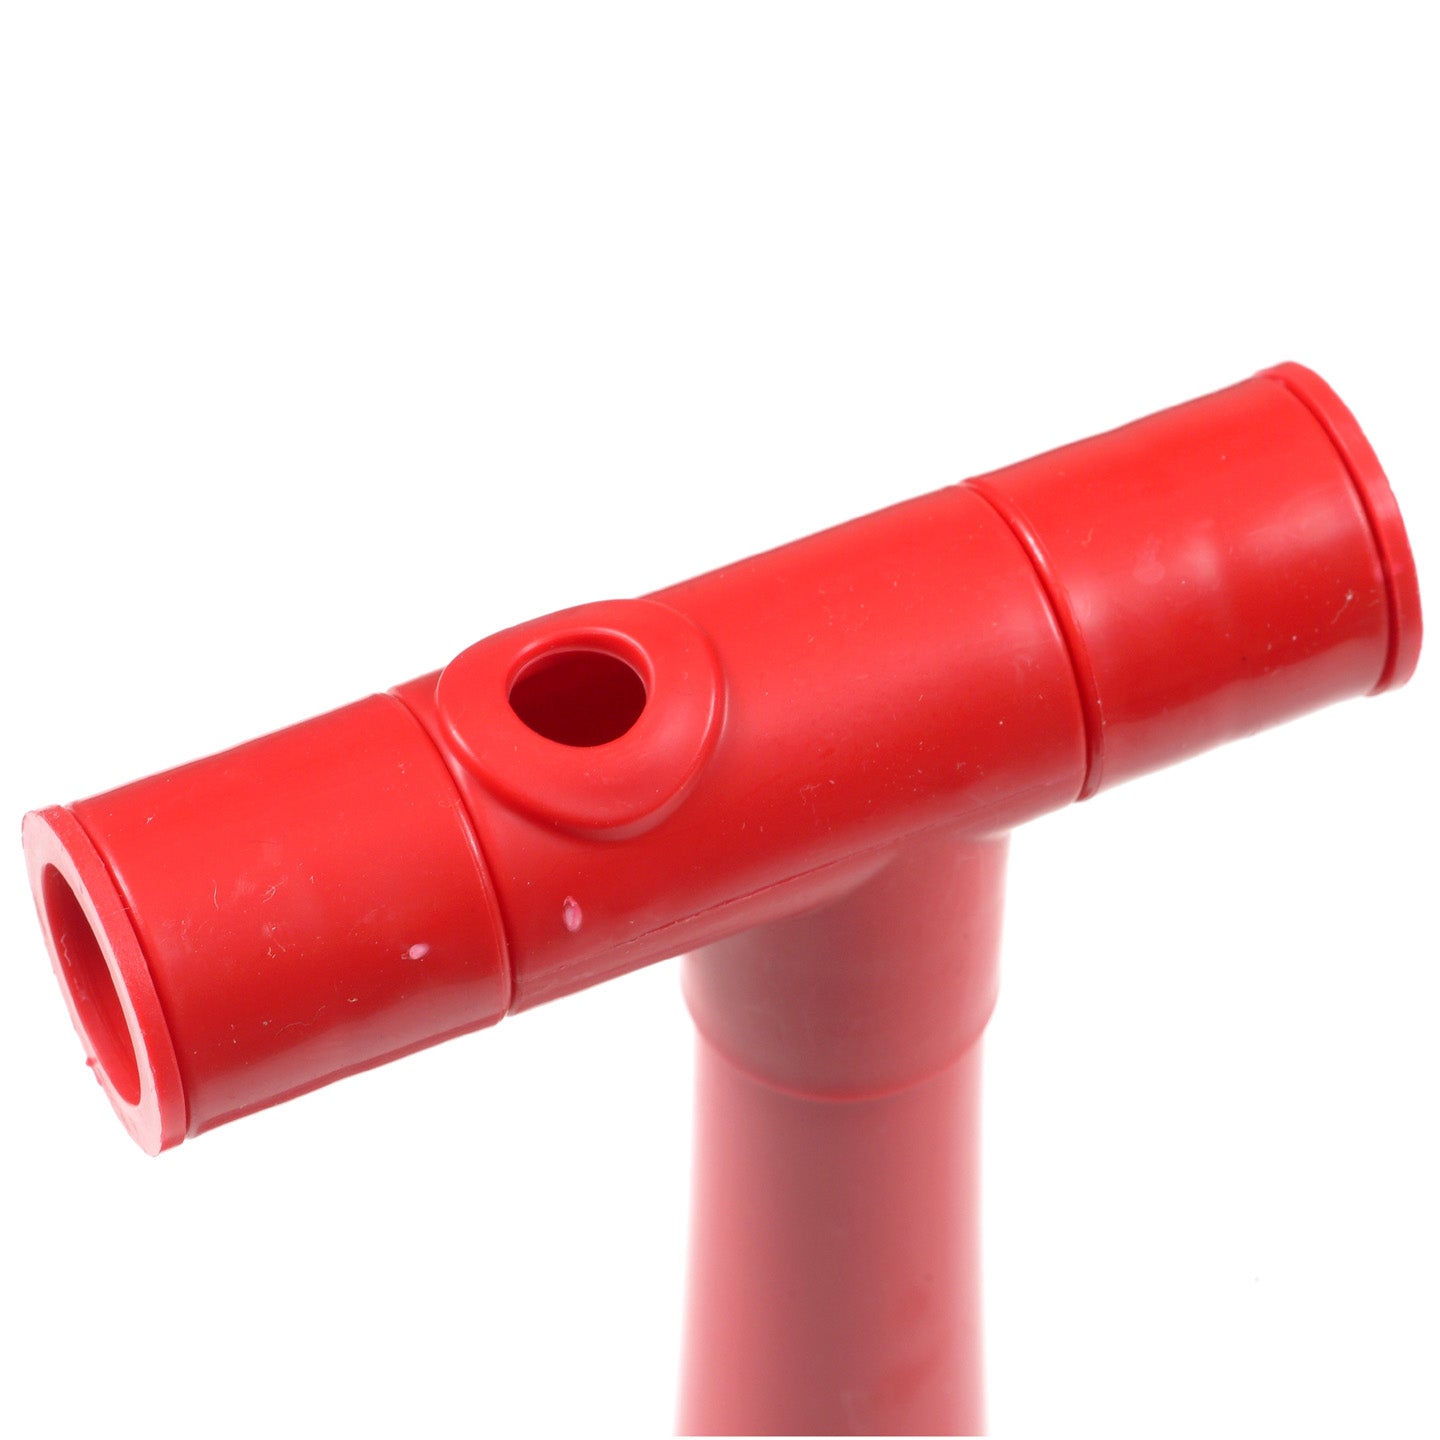 Top of Plastic Kazobo Kazoo with Horn 